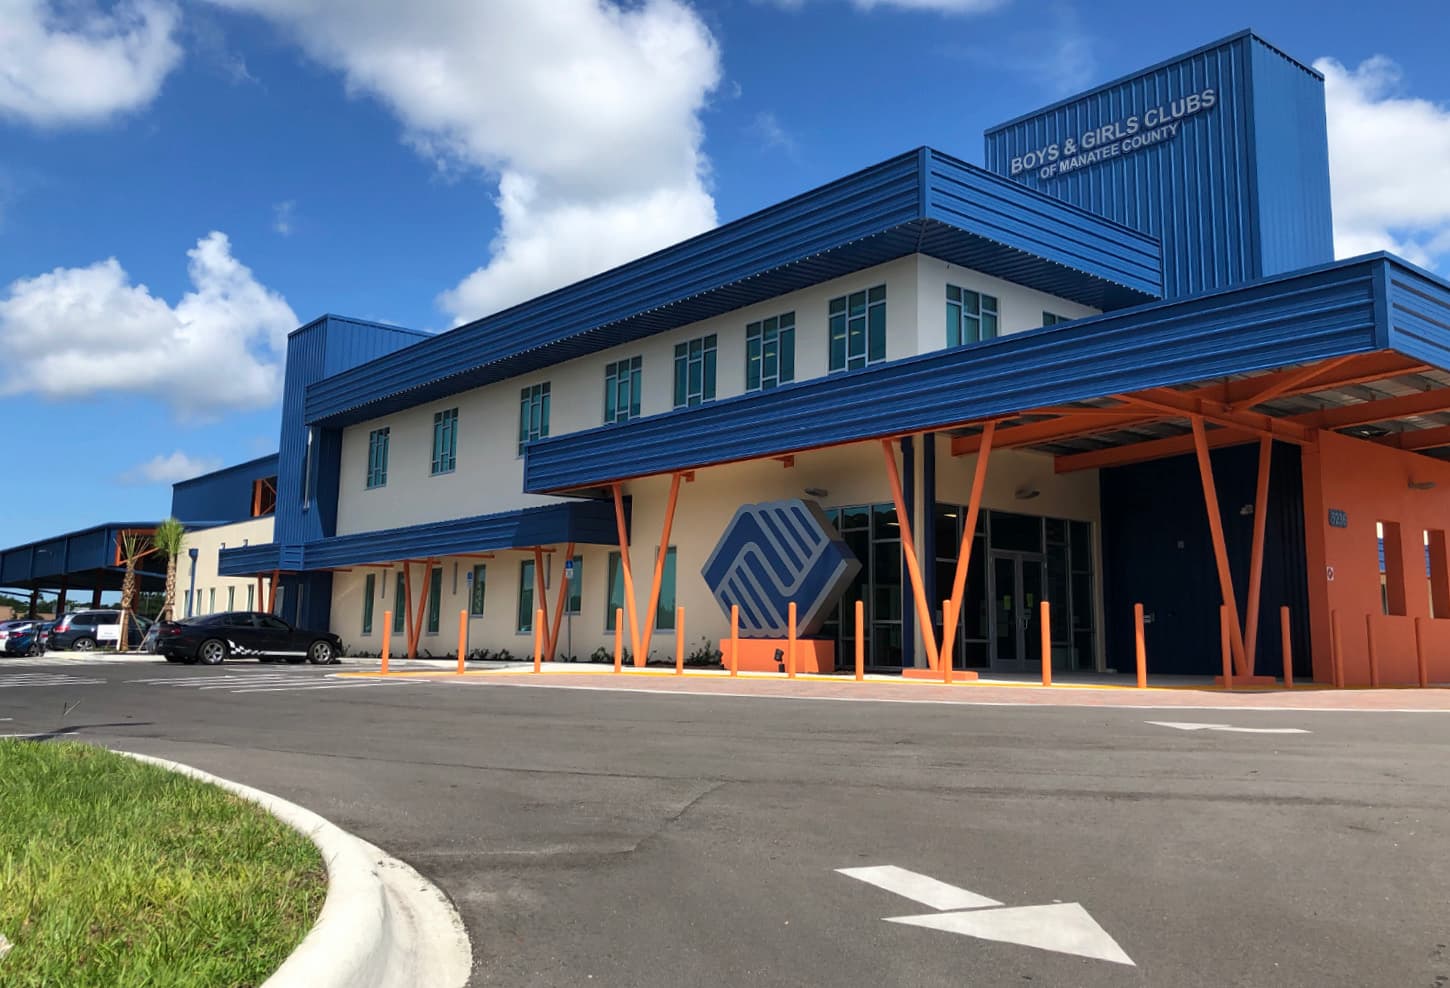 Boys & Girls Clubs of Manatee County — designed by studioCOLAB in collaboration with Ugarte & Associates.